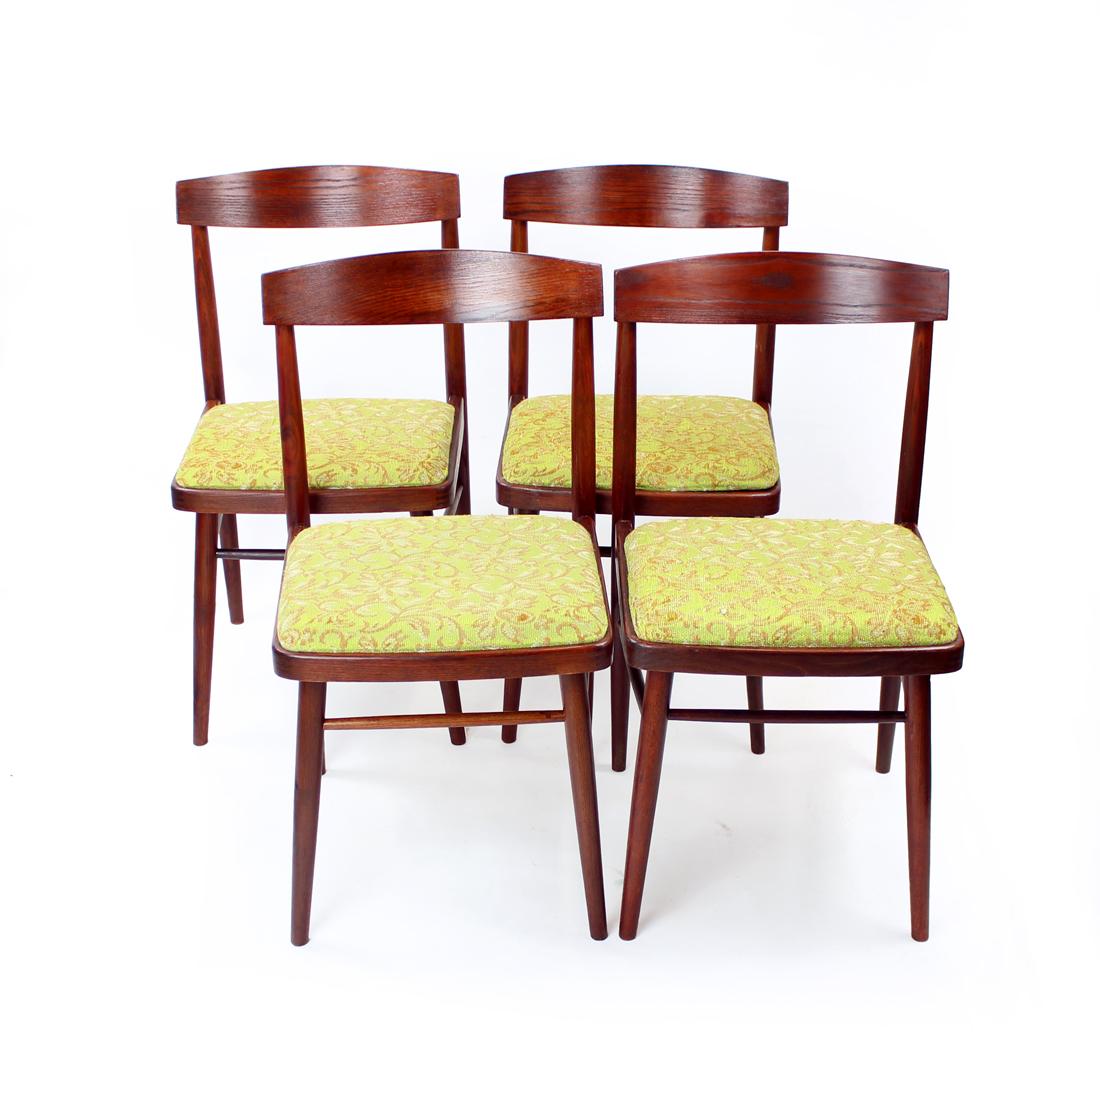 Set of four beautiful midcentury dining chairs produced by TON company in Czechoslovakia in 1960s. The original label still attached. The chairs are made of oak wood in mahogany shade of stain. Completely restored wood. The seat is in an original